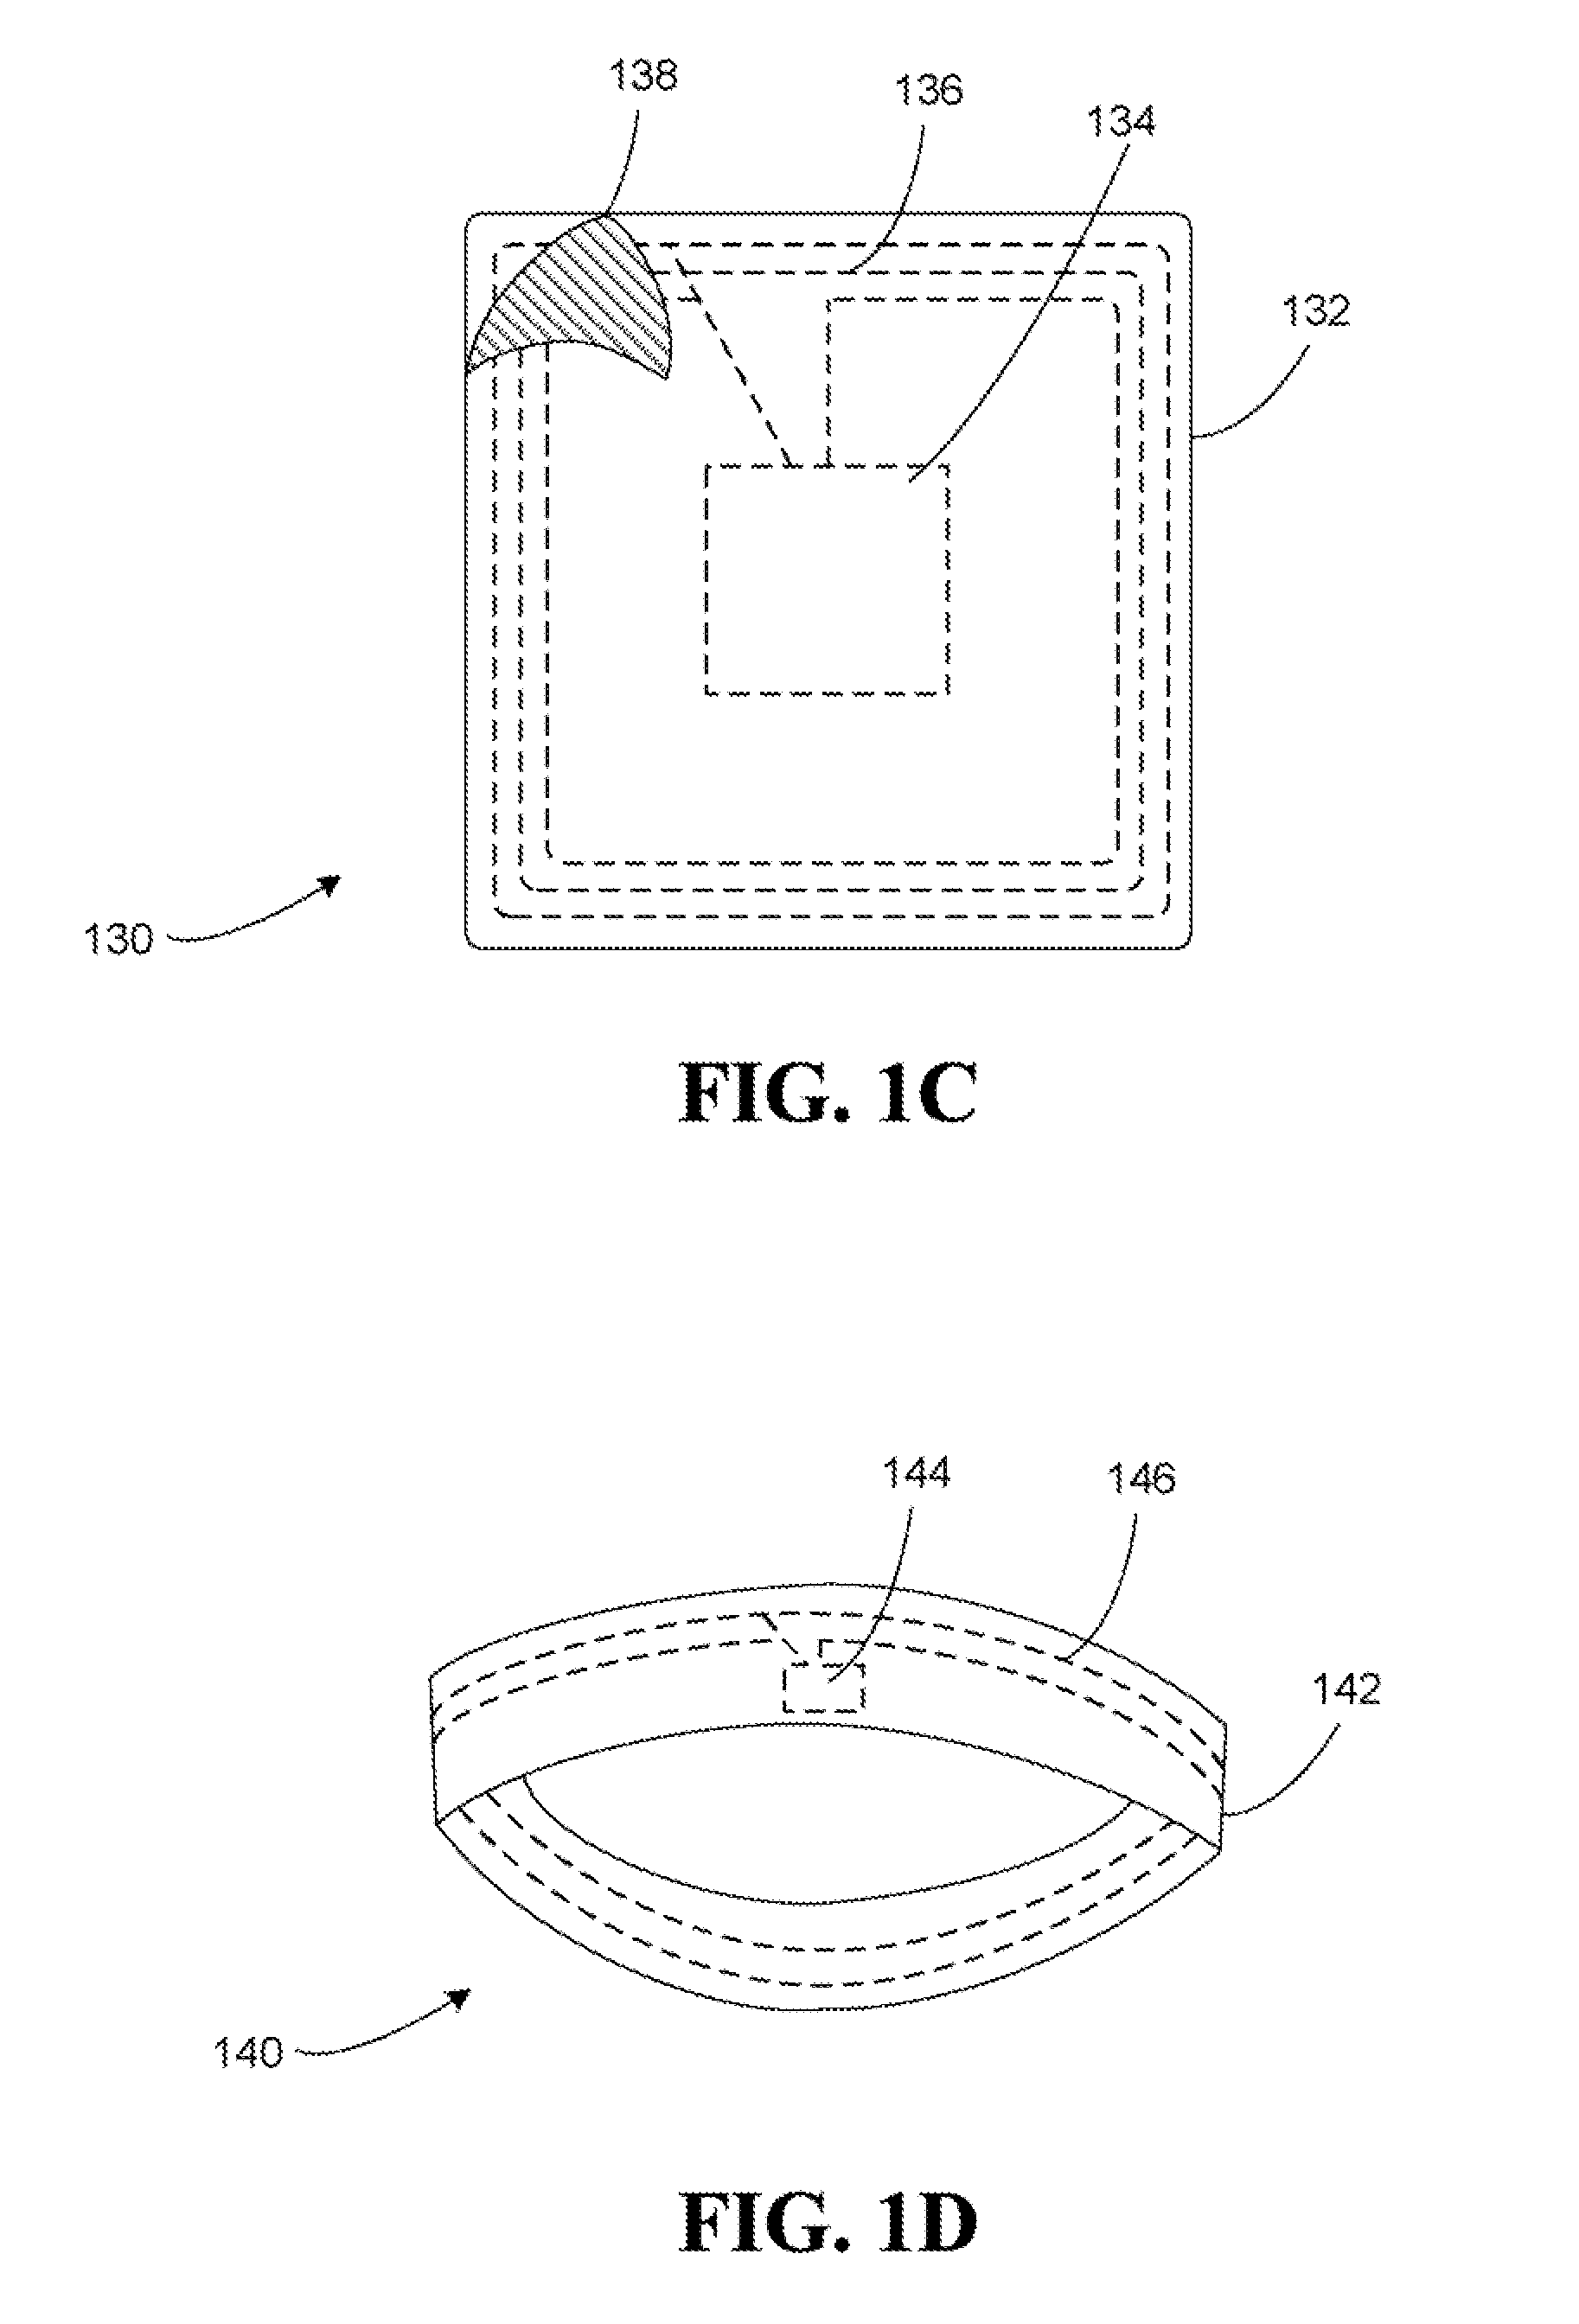 Systems and Methods for Disabling a Contactless Transaction Device